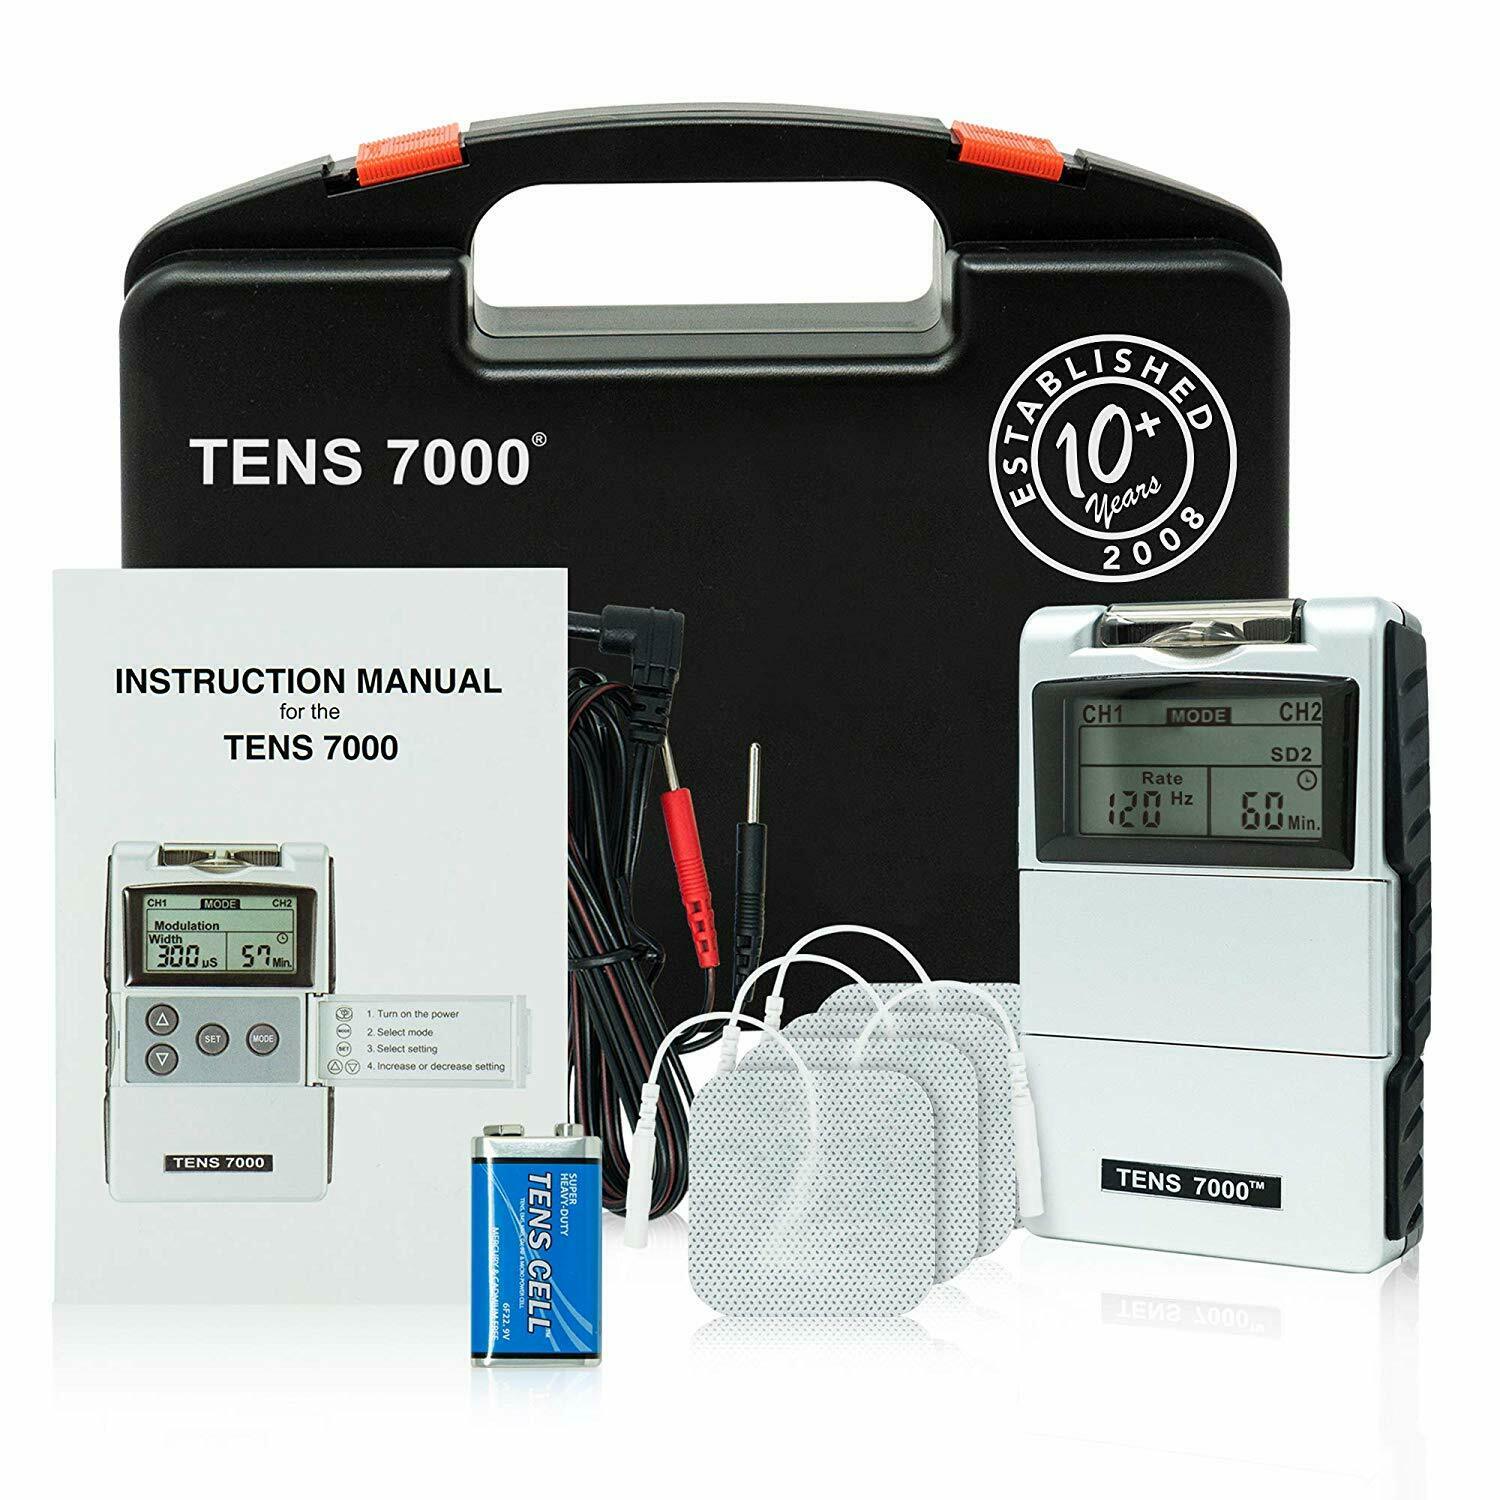 TENS 7000 2nd Edition Digital TENS Unit with Accessories on Web